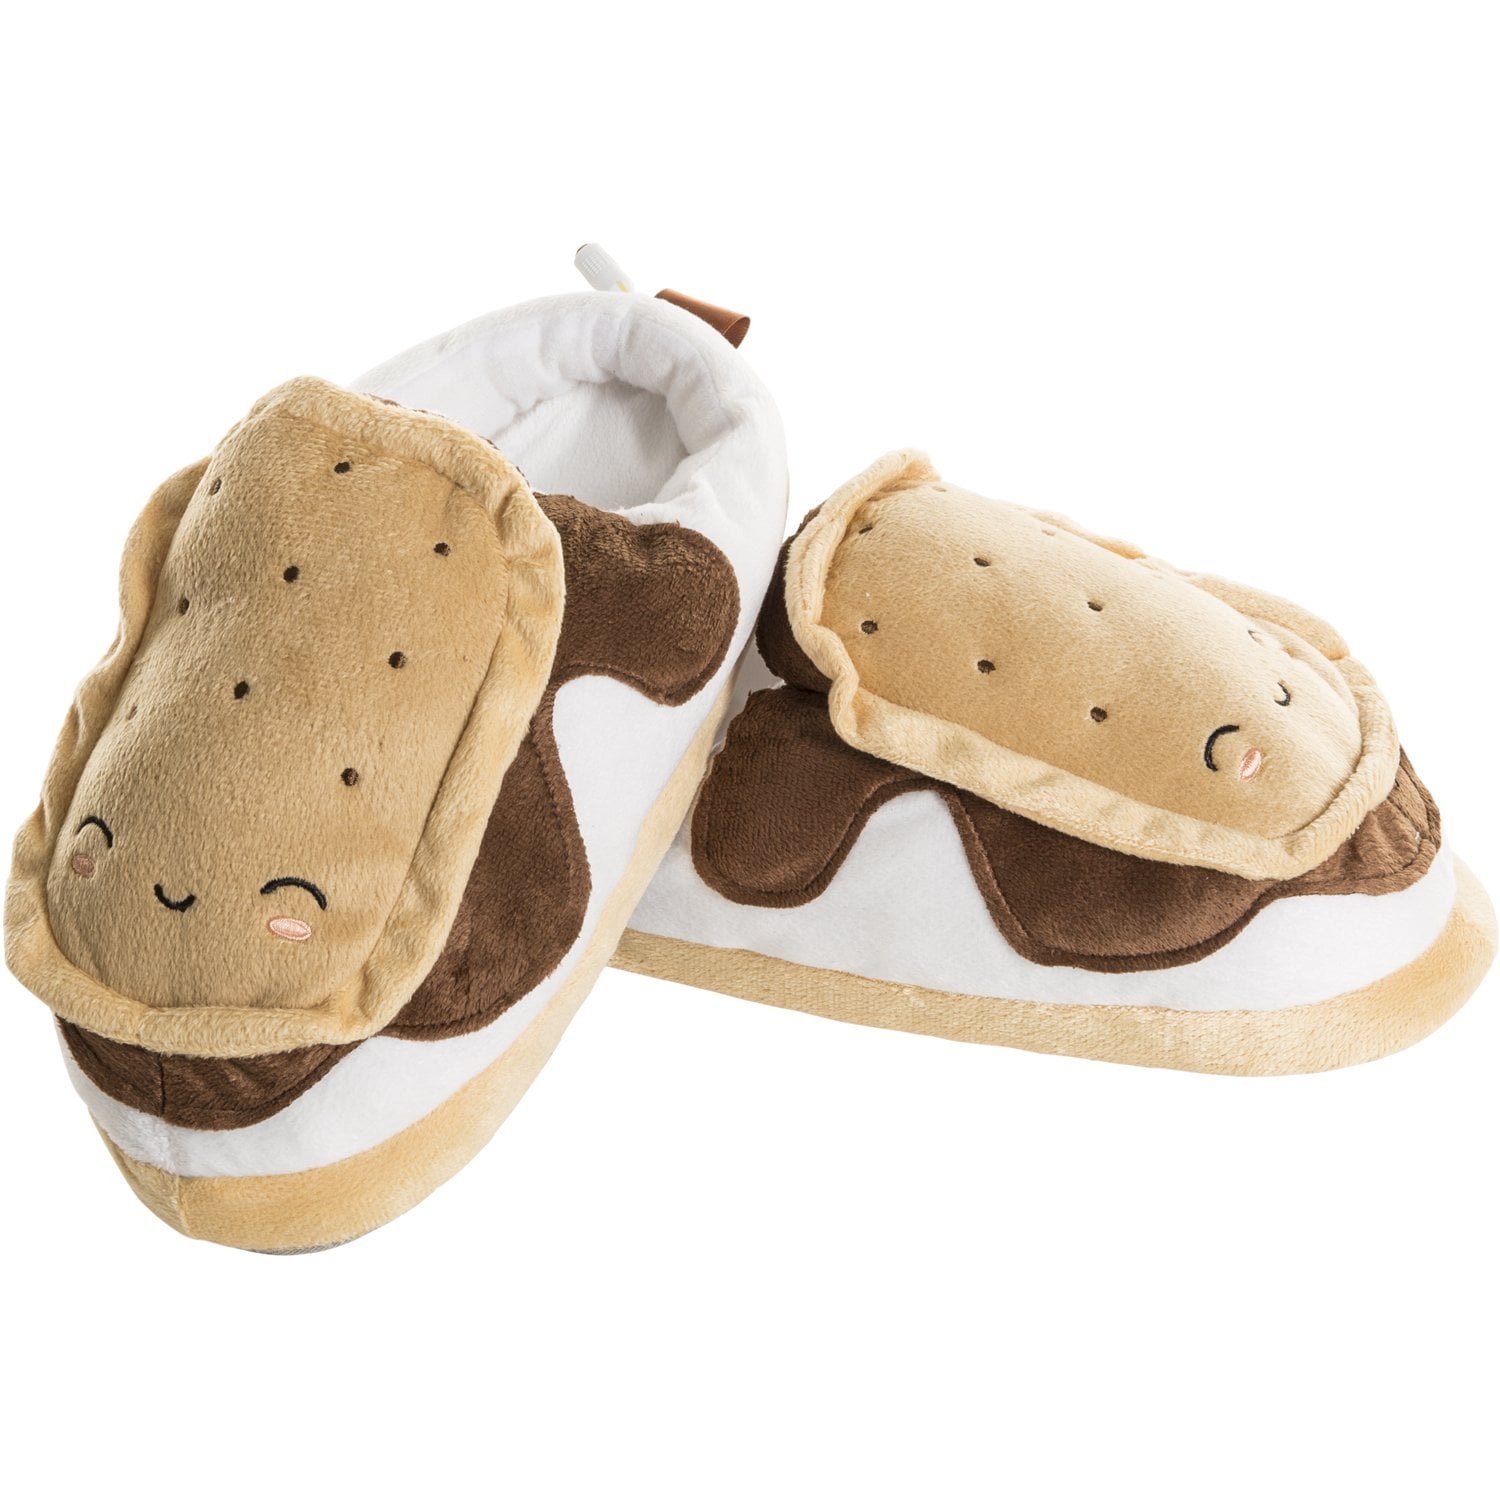 LA PLAGE Winter Slippers for Boy Warm Cozy Plush Indoor Slip-on Slippers with Hard Sole for Kid 